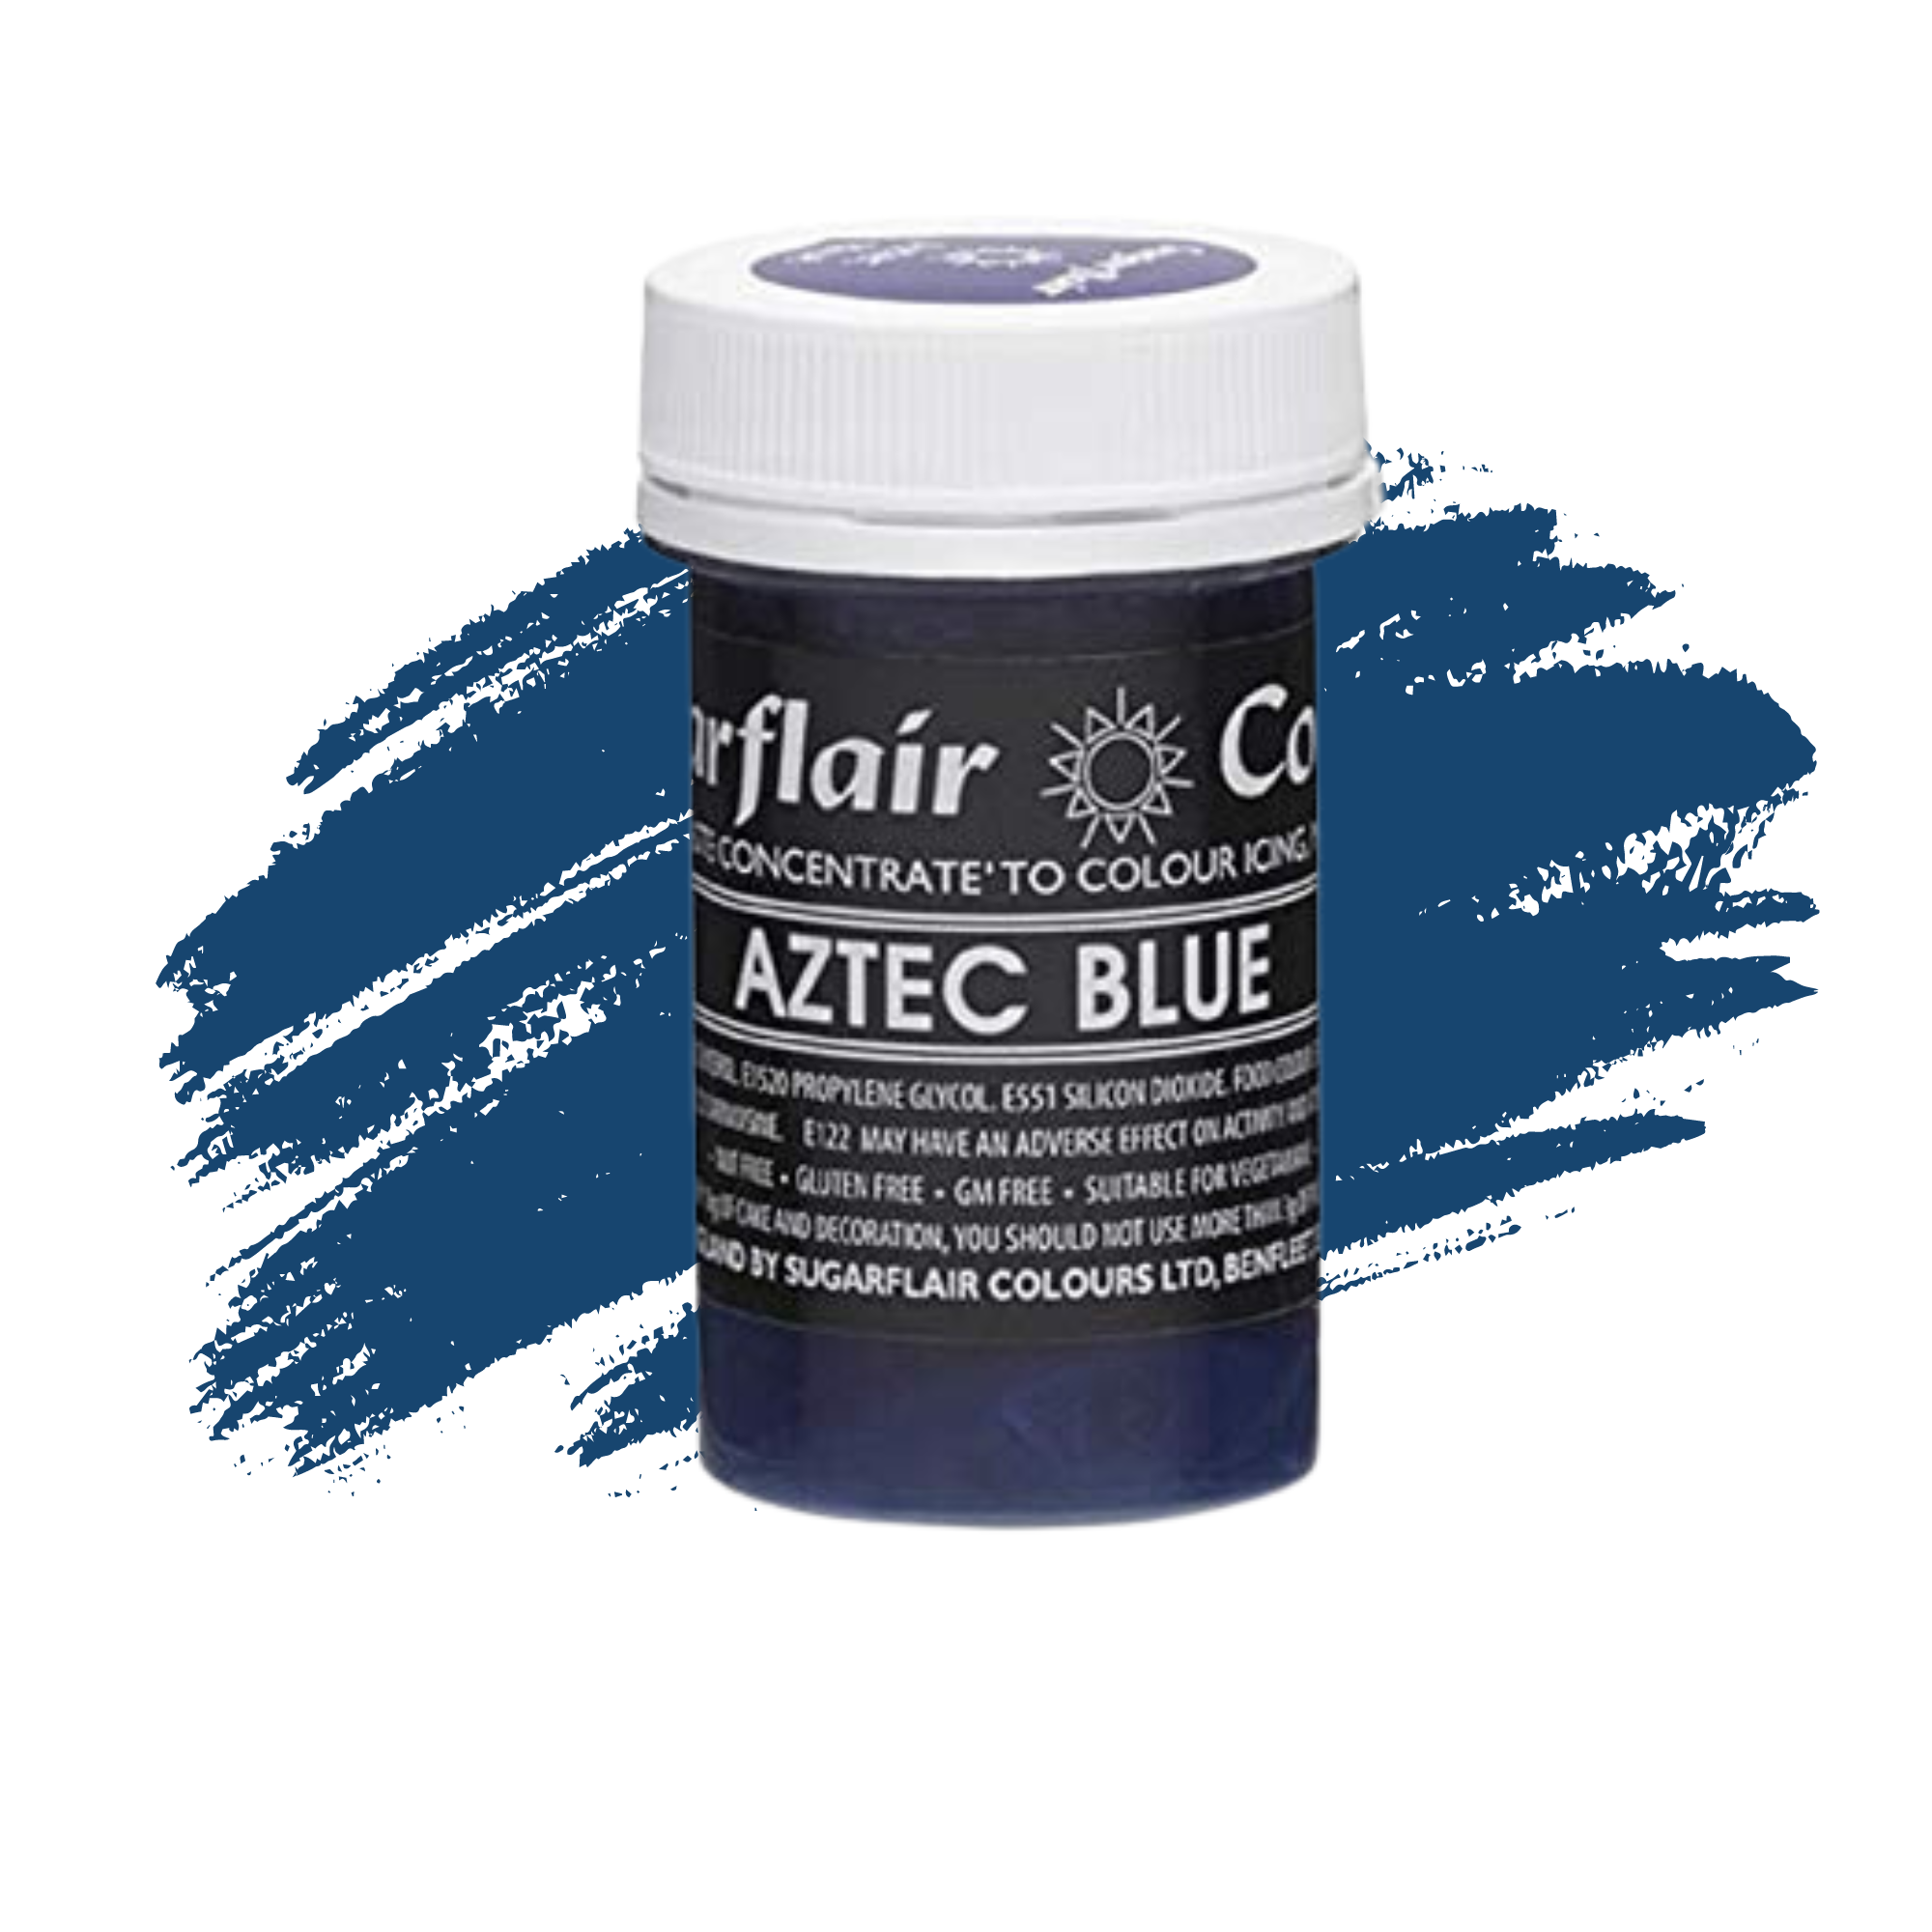 Sugarflair Paste Colours Concentrated Food Colouring - Spectral Aztec Blue - 25g